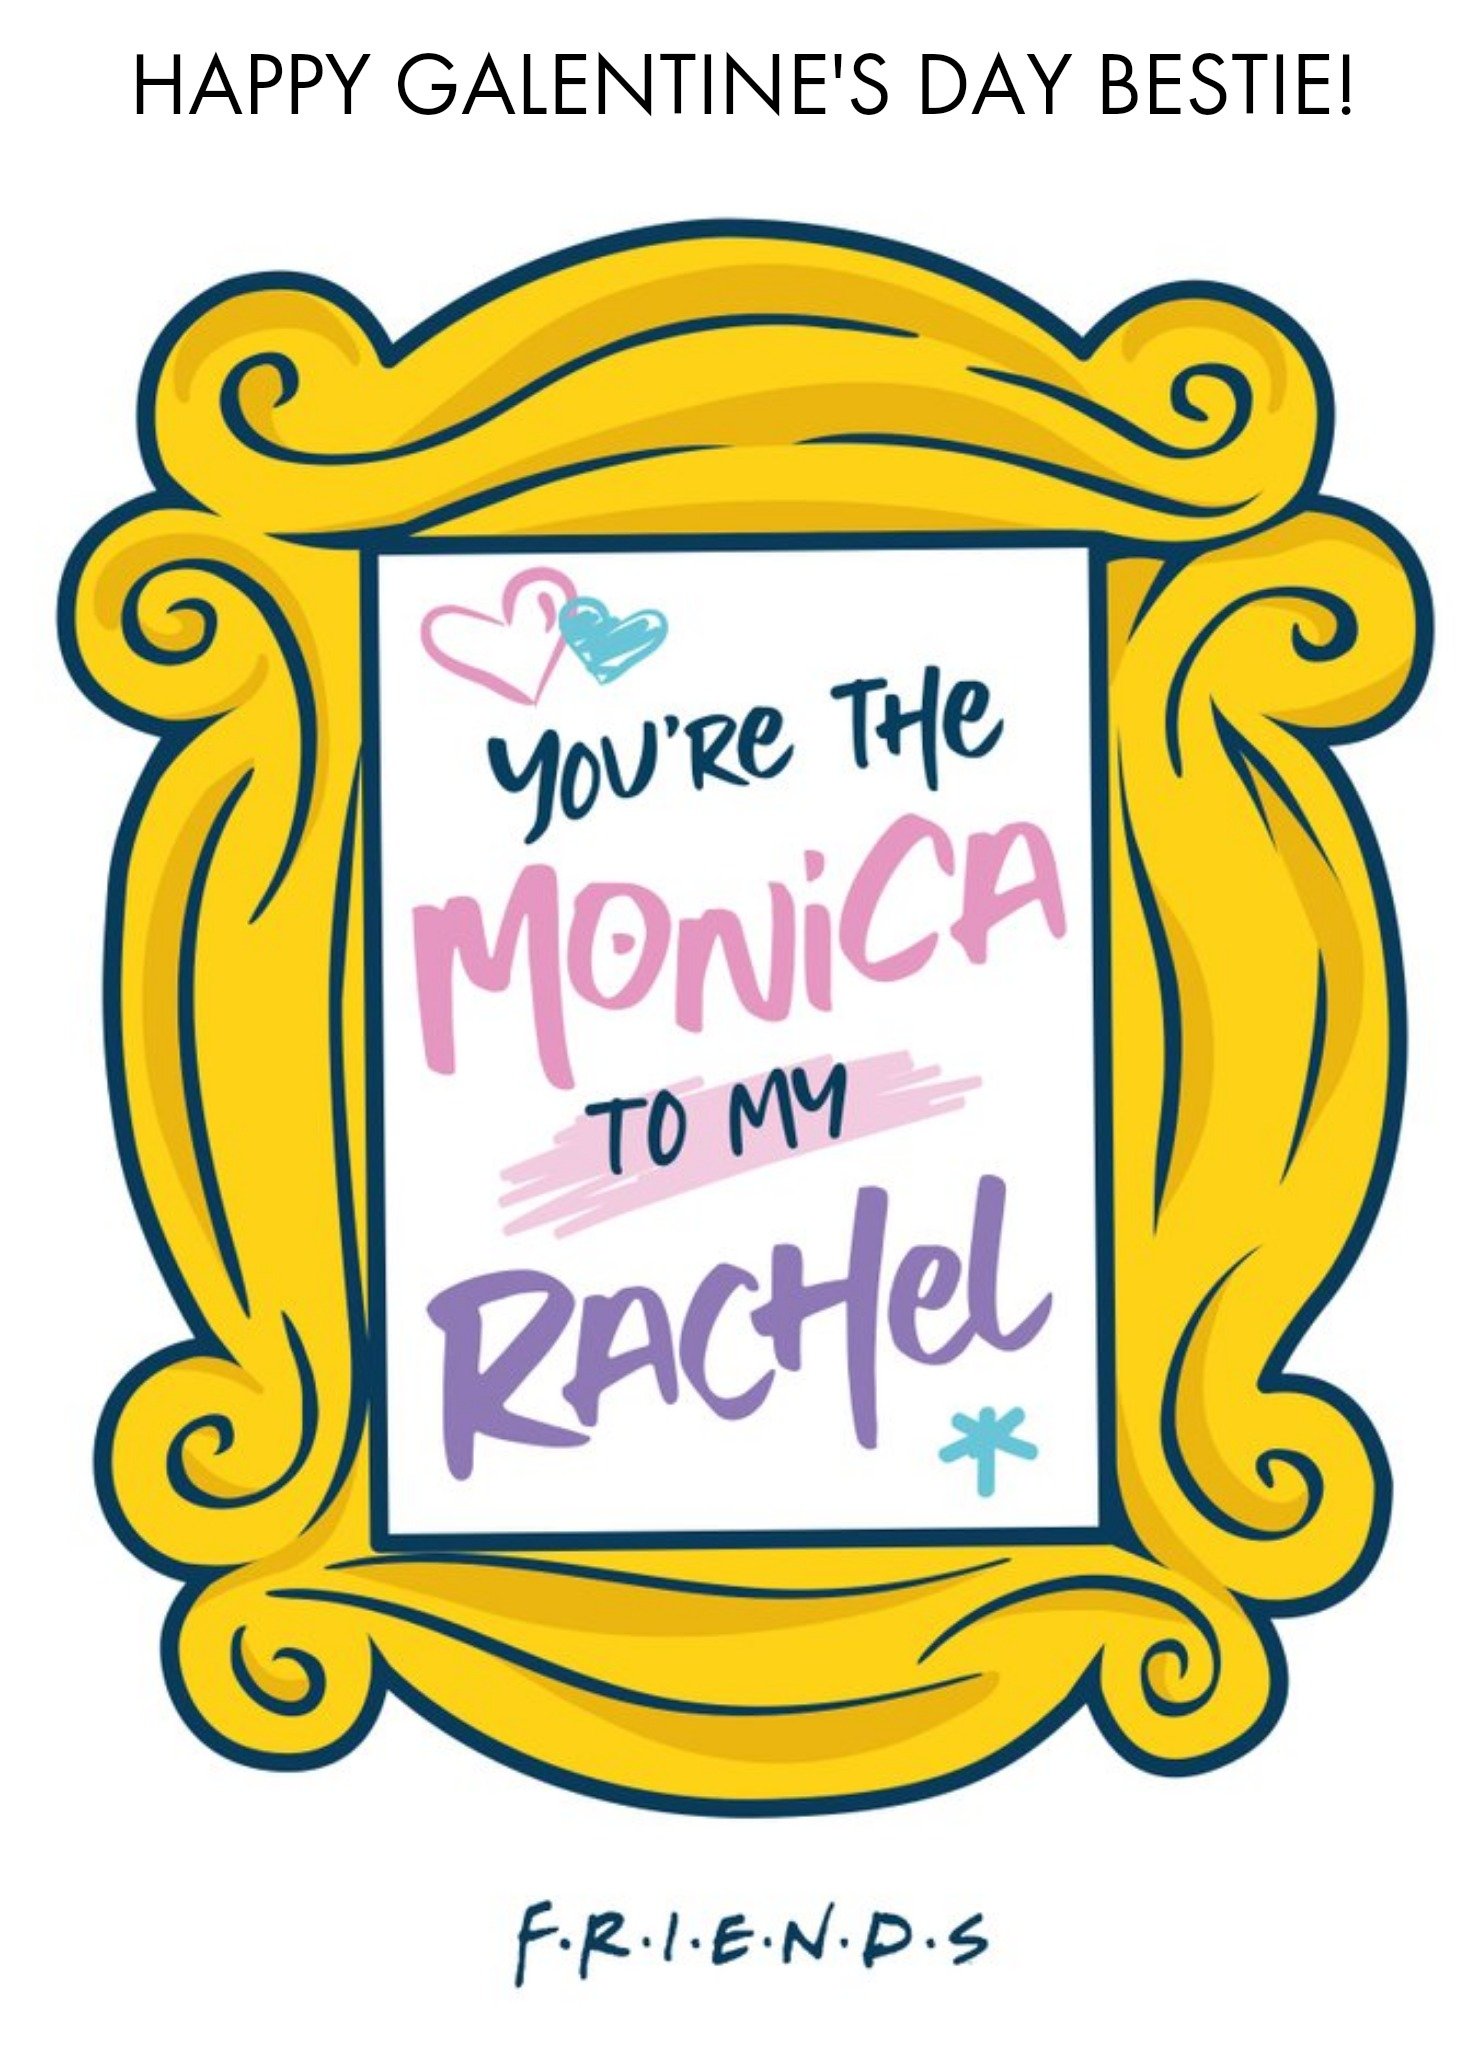 Moonpig Friends Tv You Are The Monica To My Rachel Happy Galentines Day Card Ecard